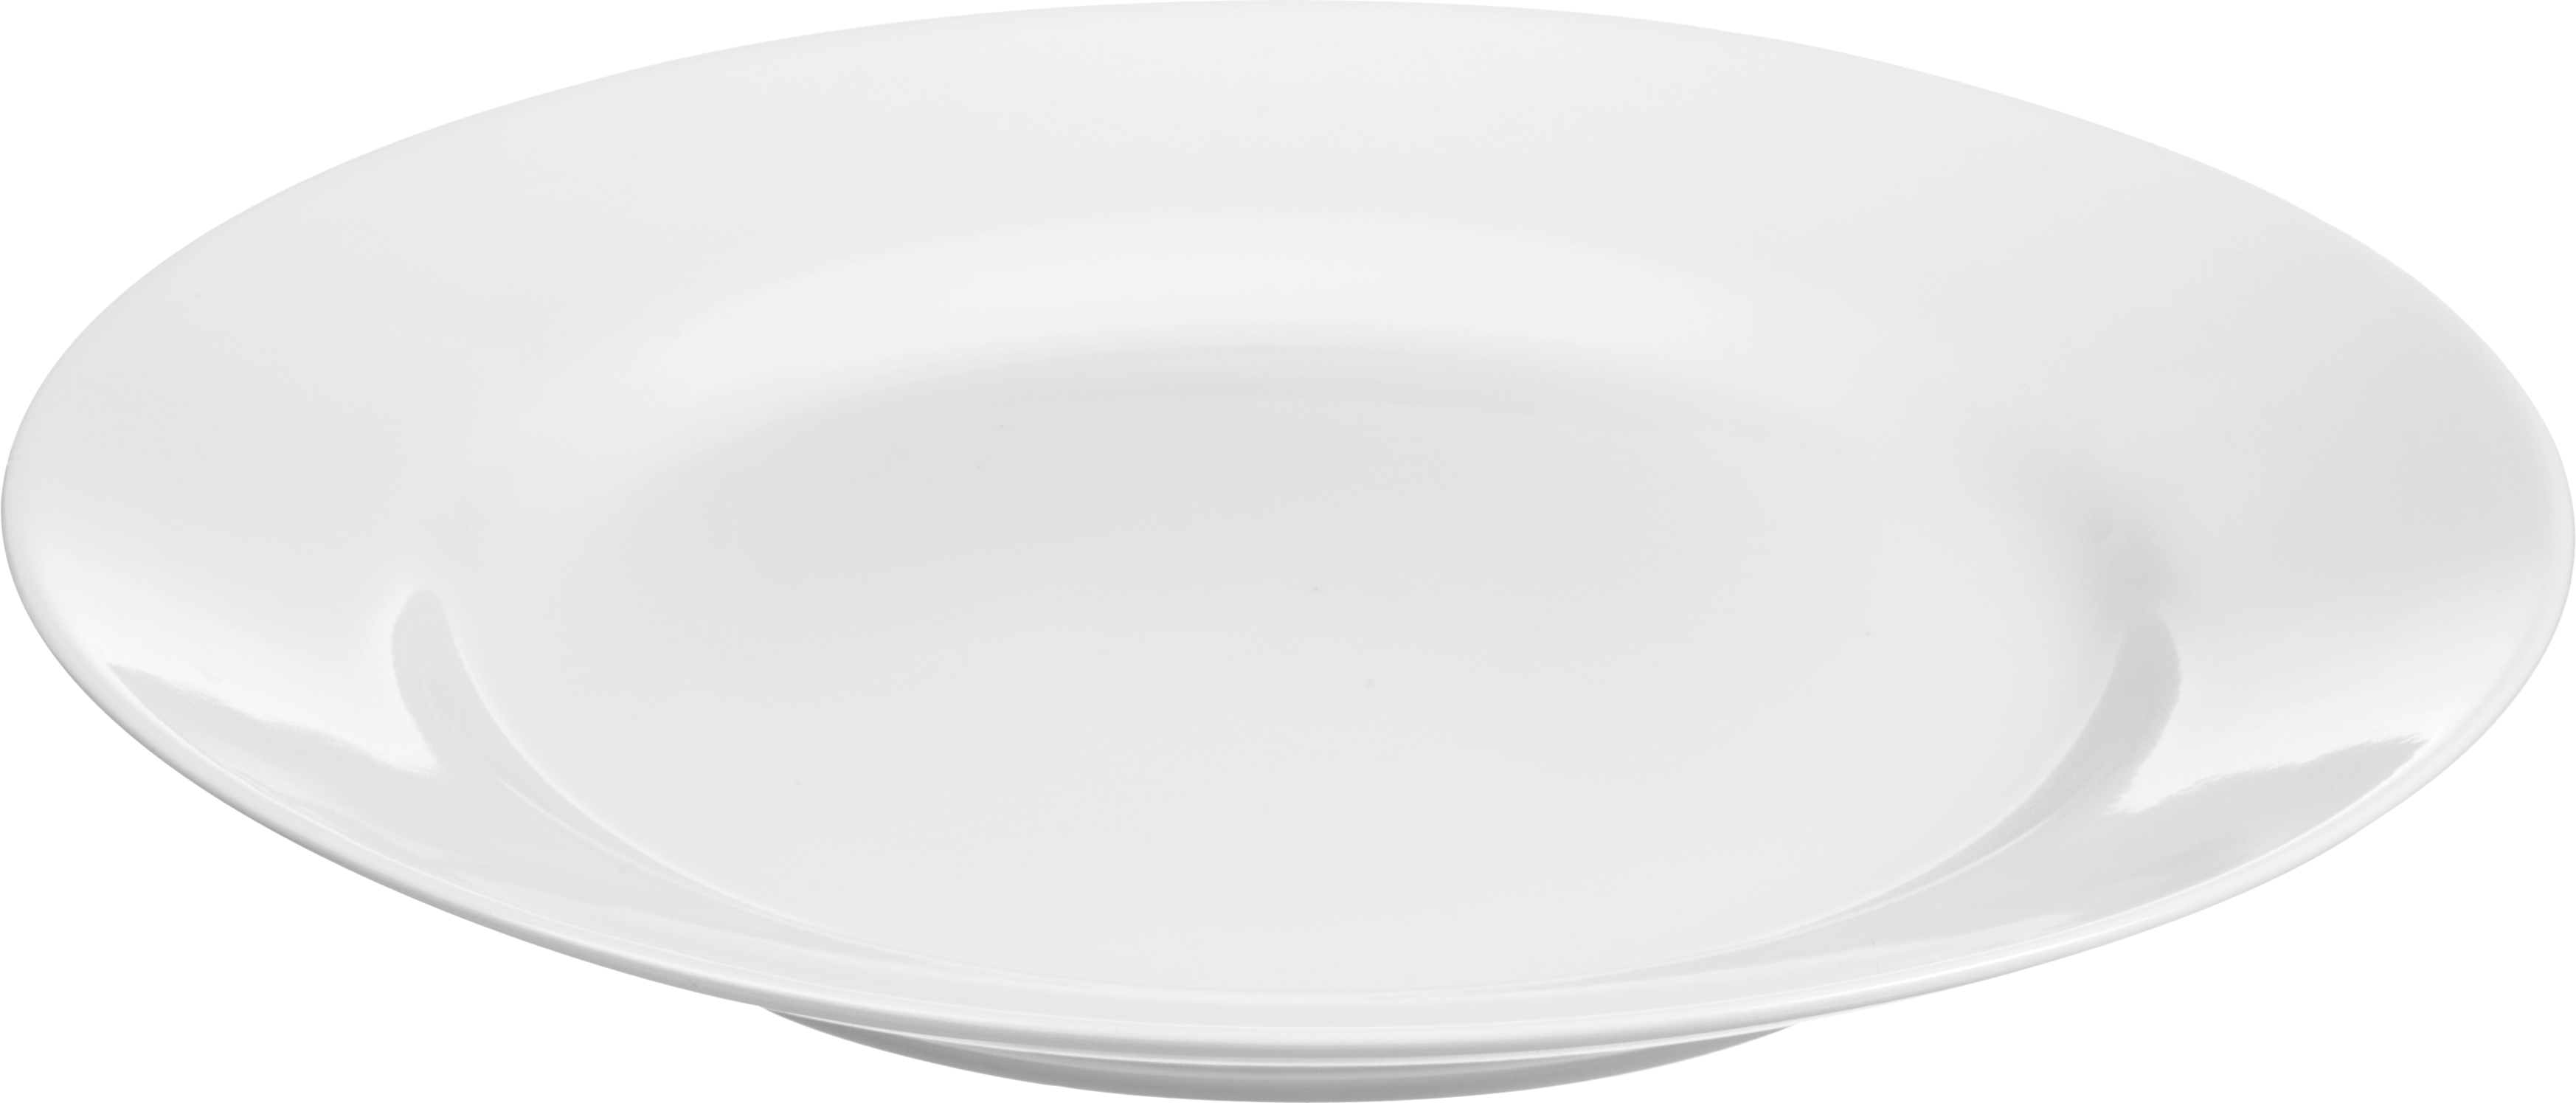 White Plate PNG HD Image